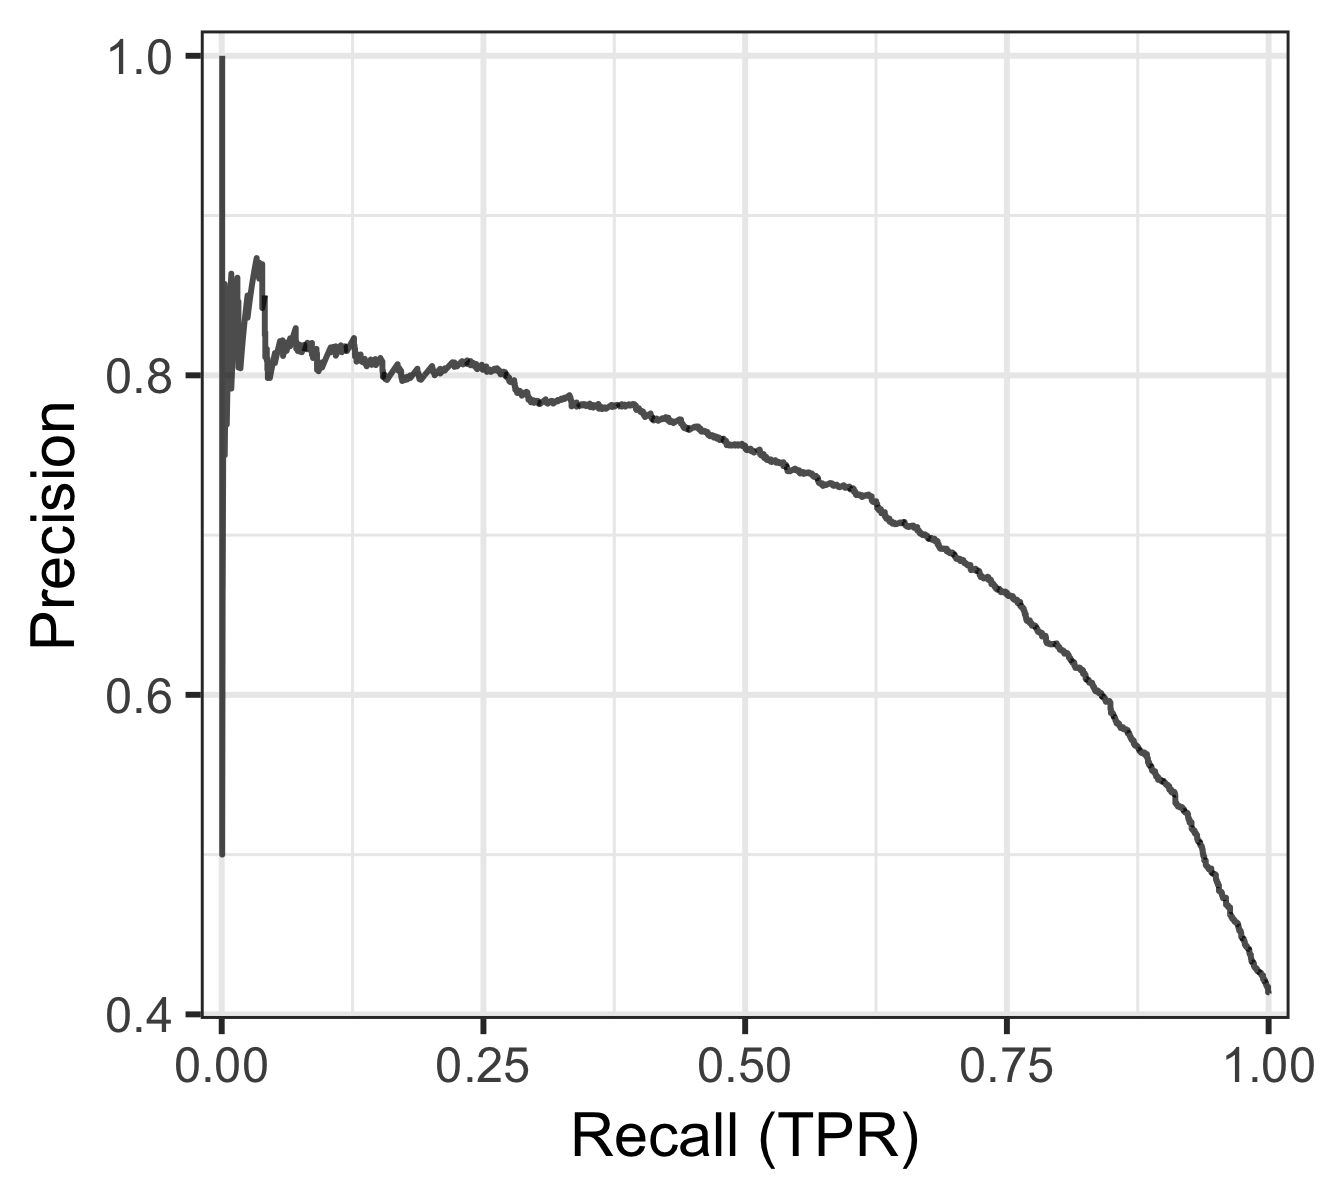 Precision-recall curve for the same example data with 0.4 positives.